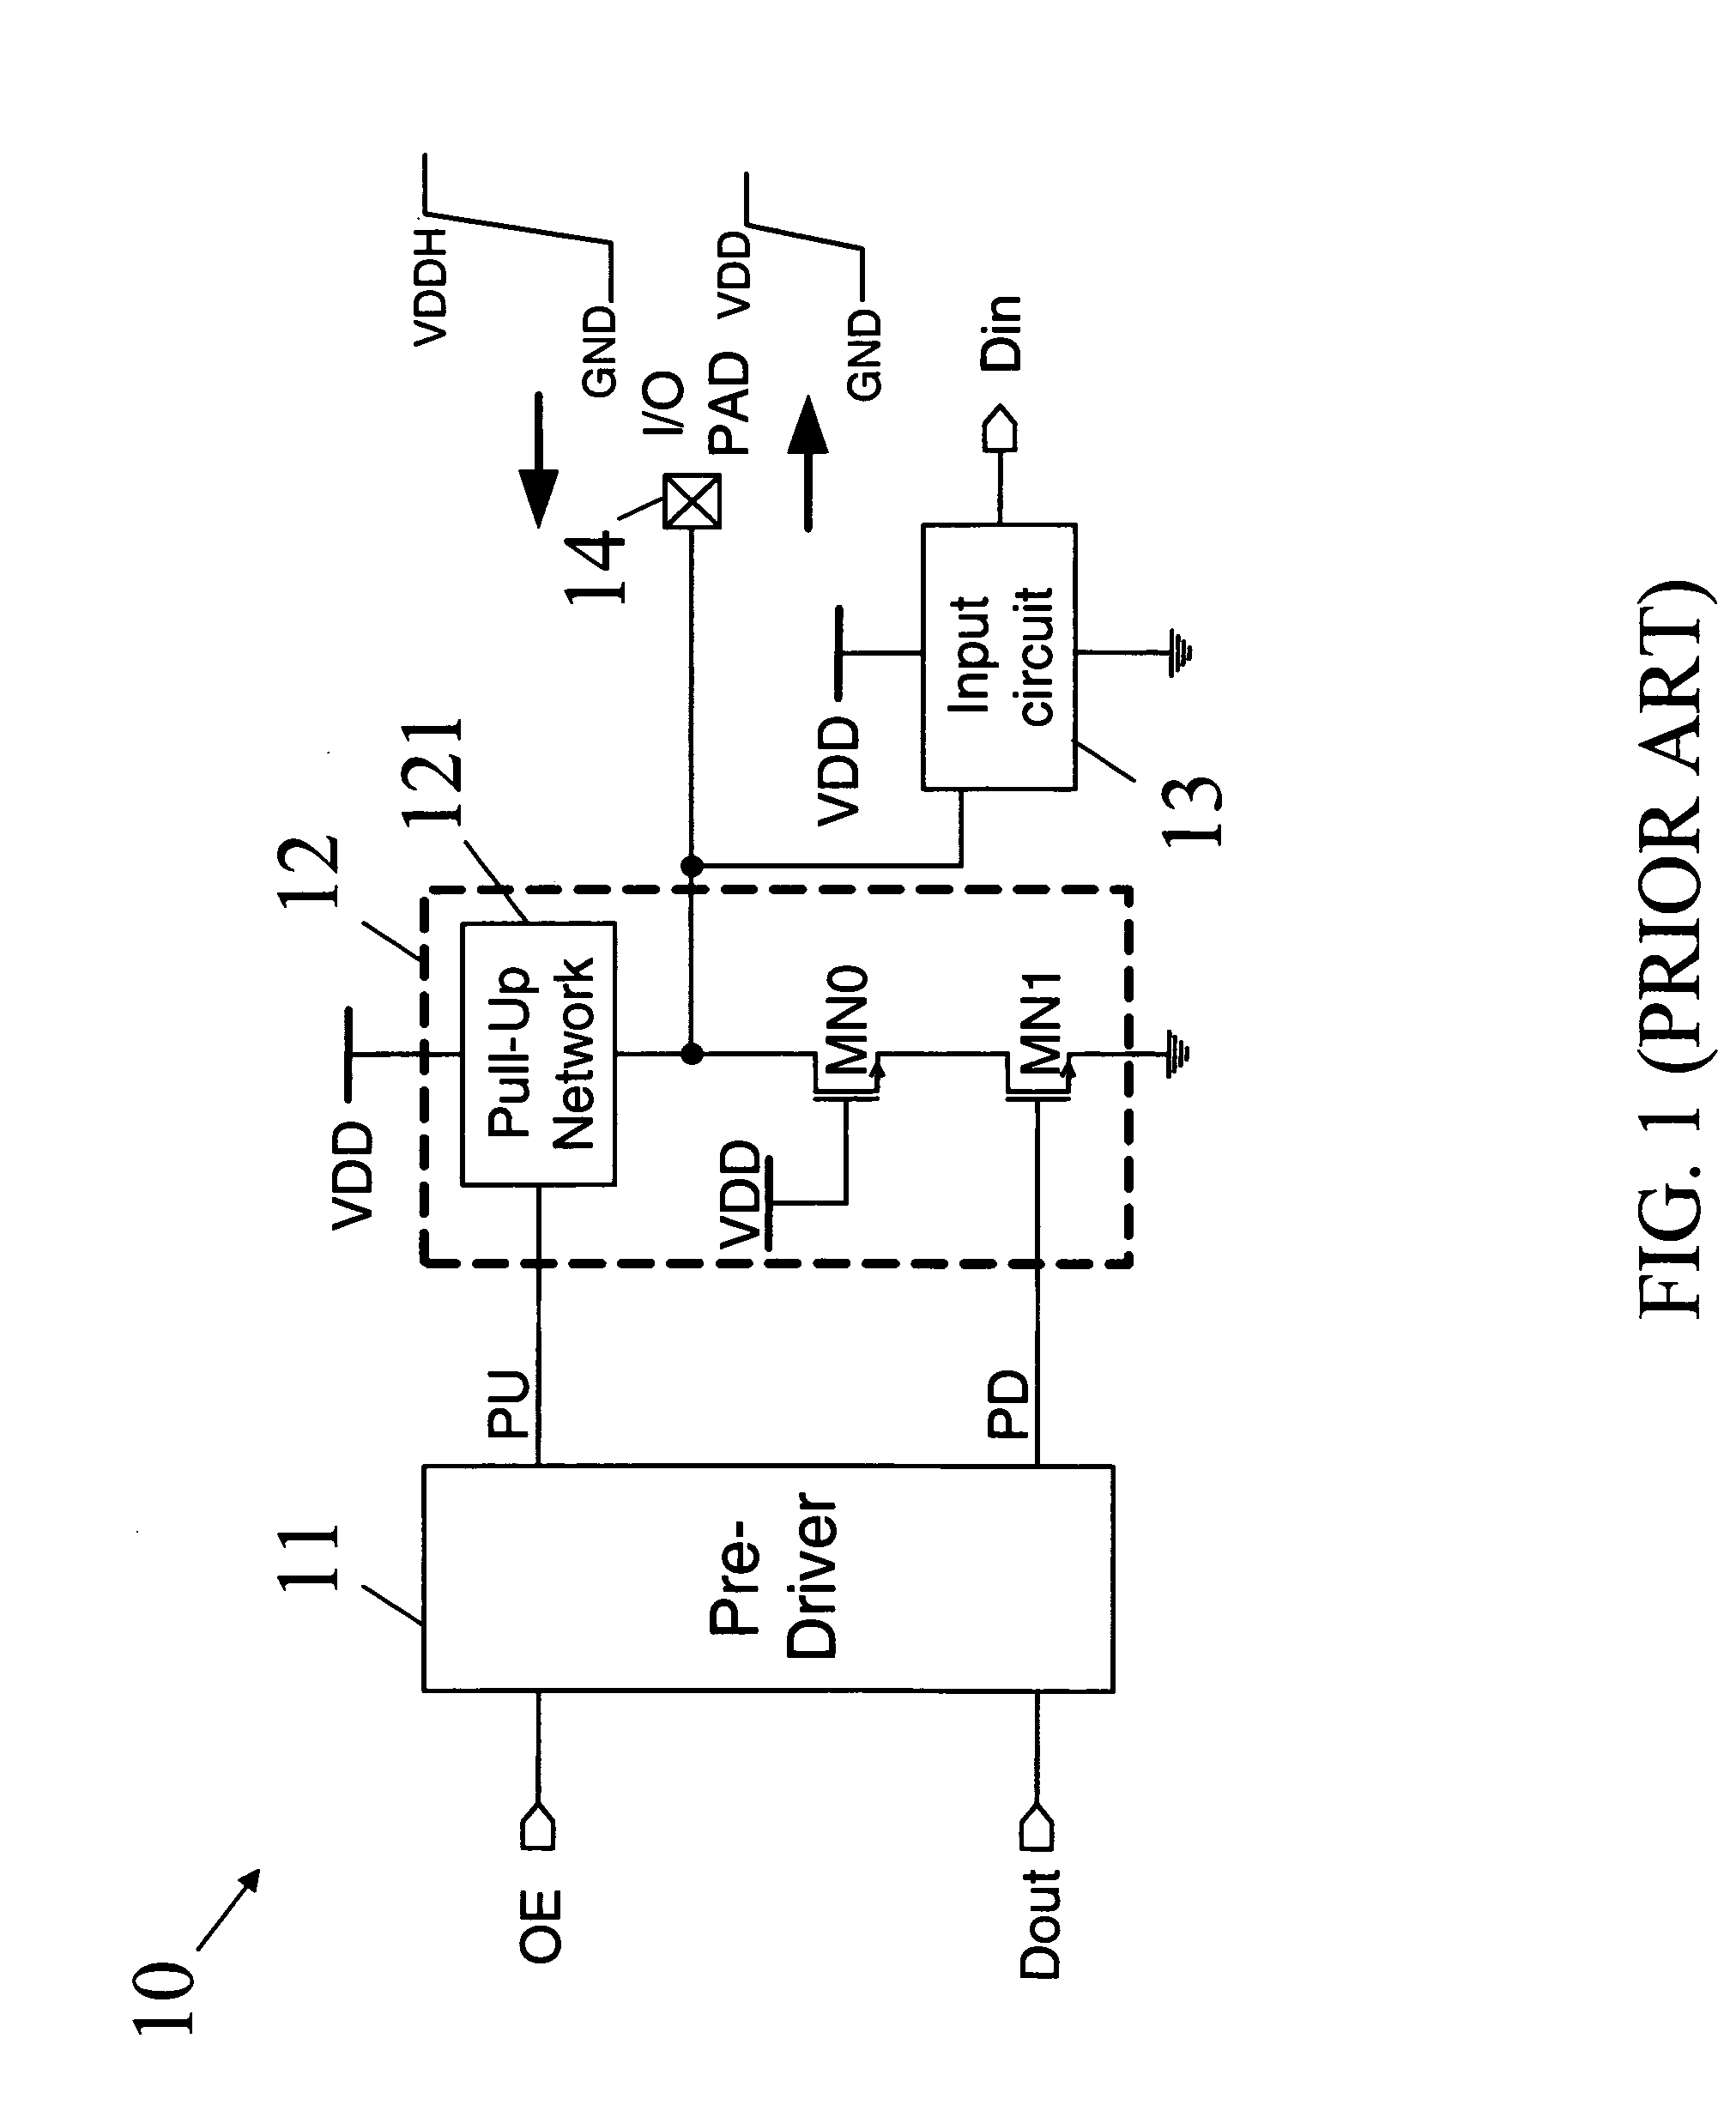 Protection circuits and methods of protecting circuits